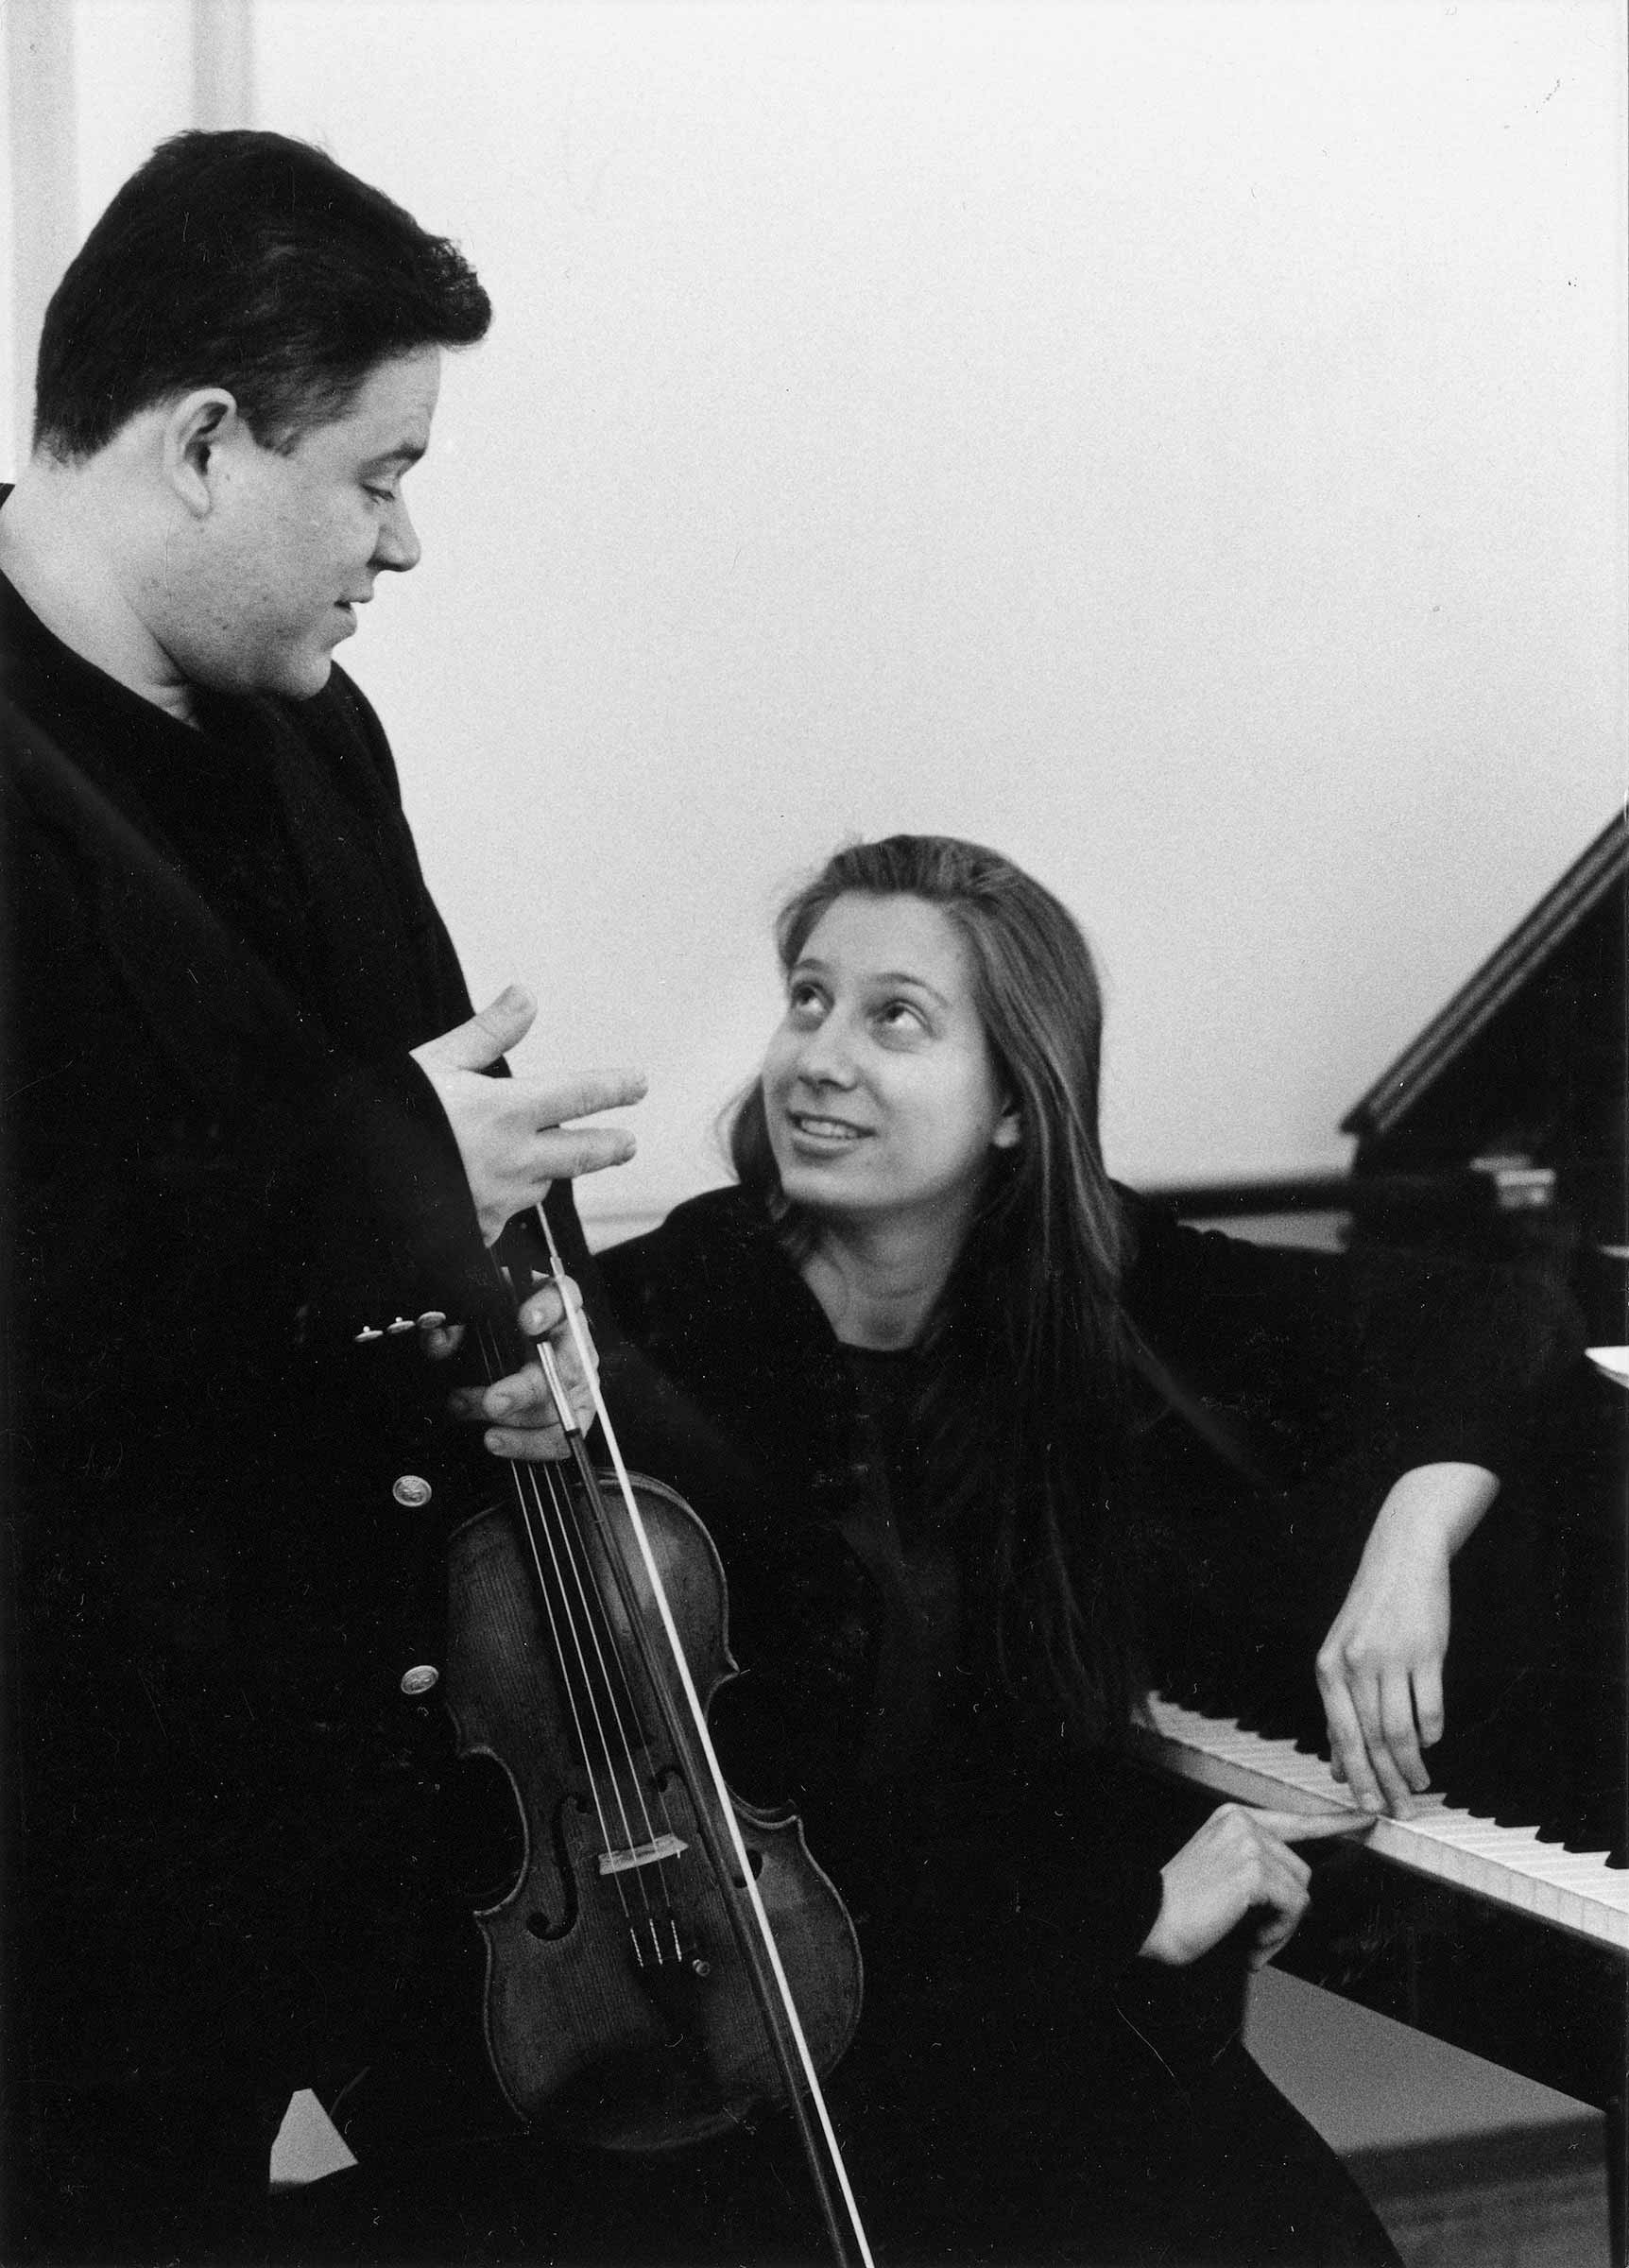 Eva practcing with the violinist Jorge